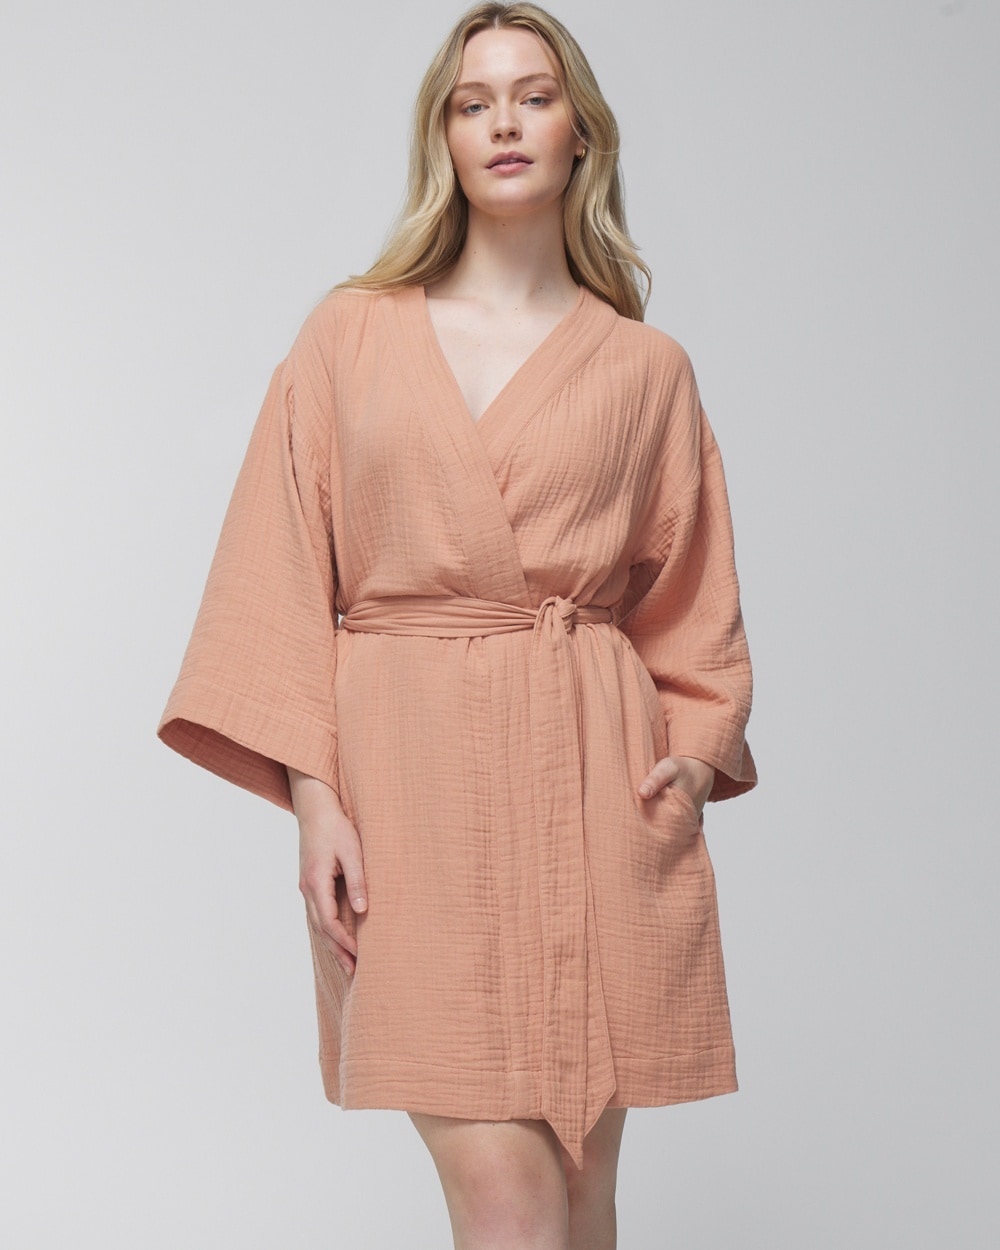 Soma Women's Textured Cotton Robe In Nude Size Large/xl |  In Creme Brulee